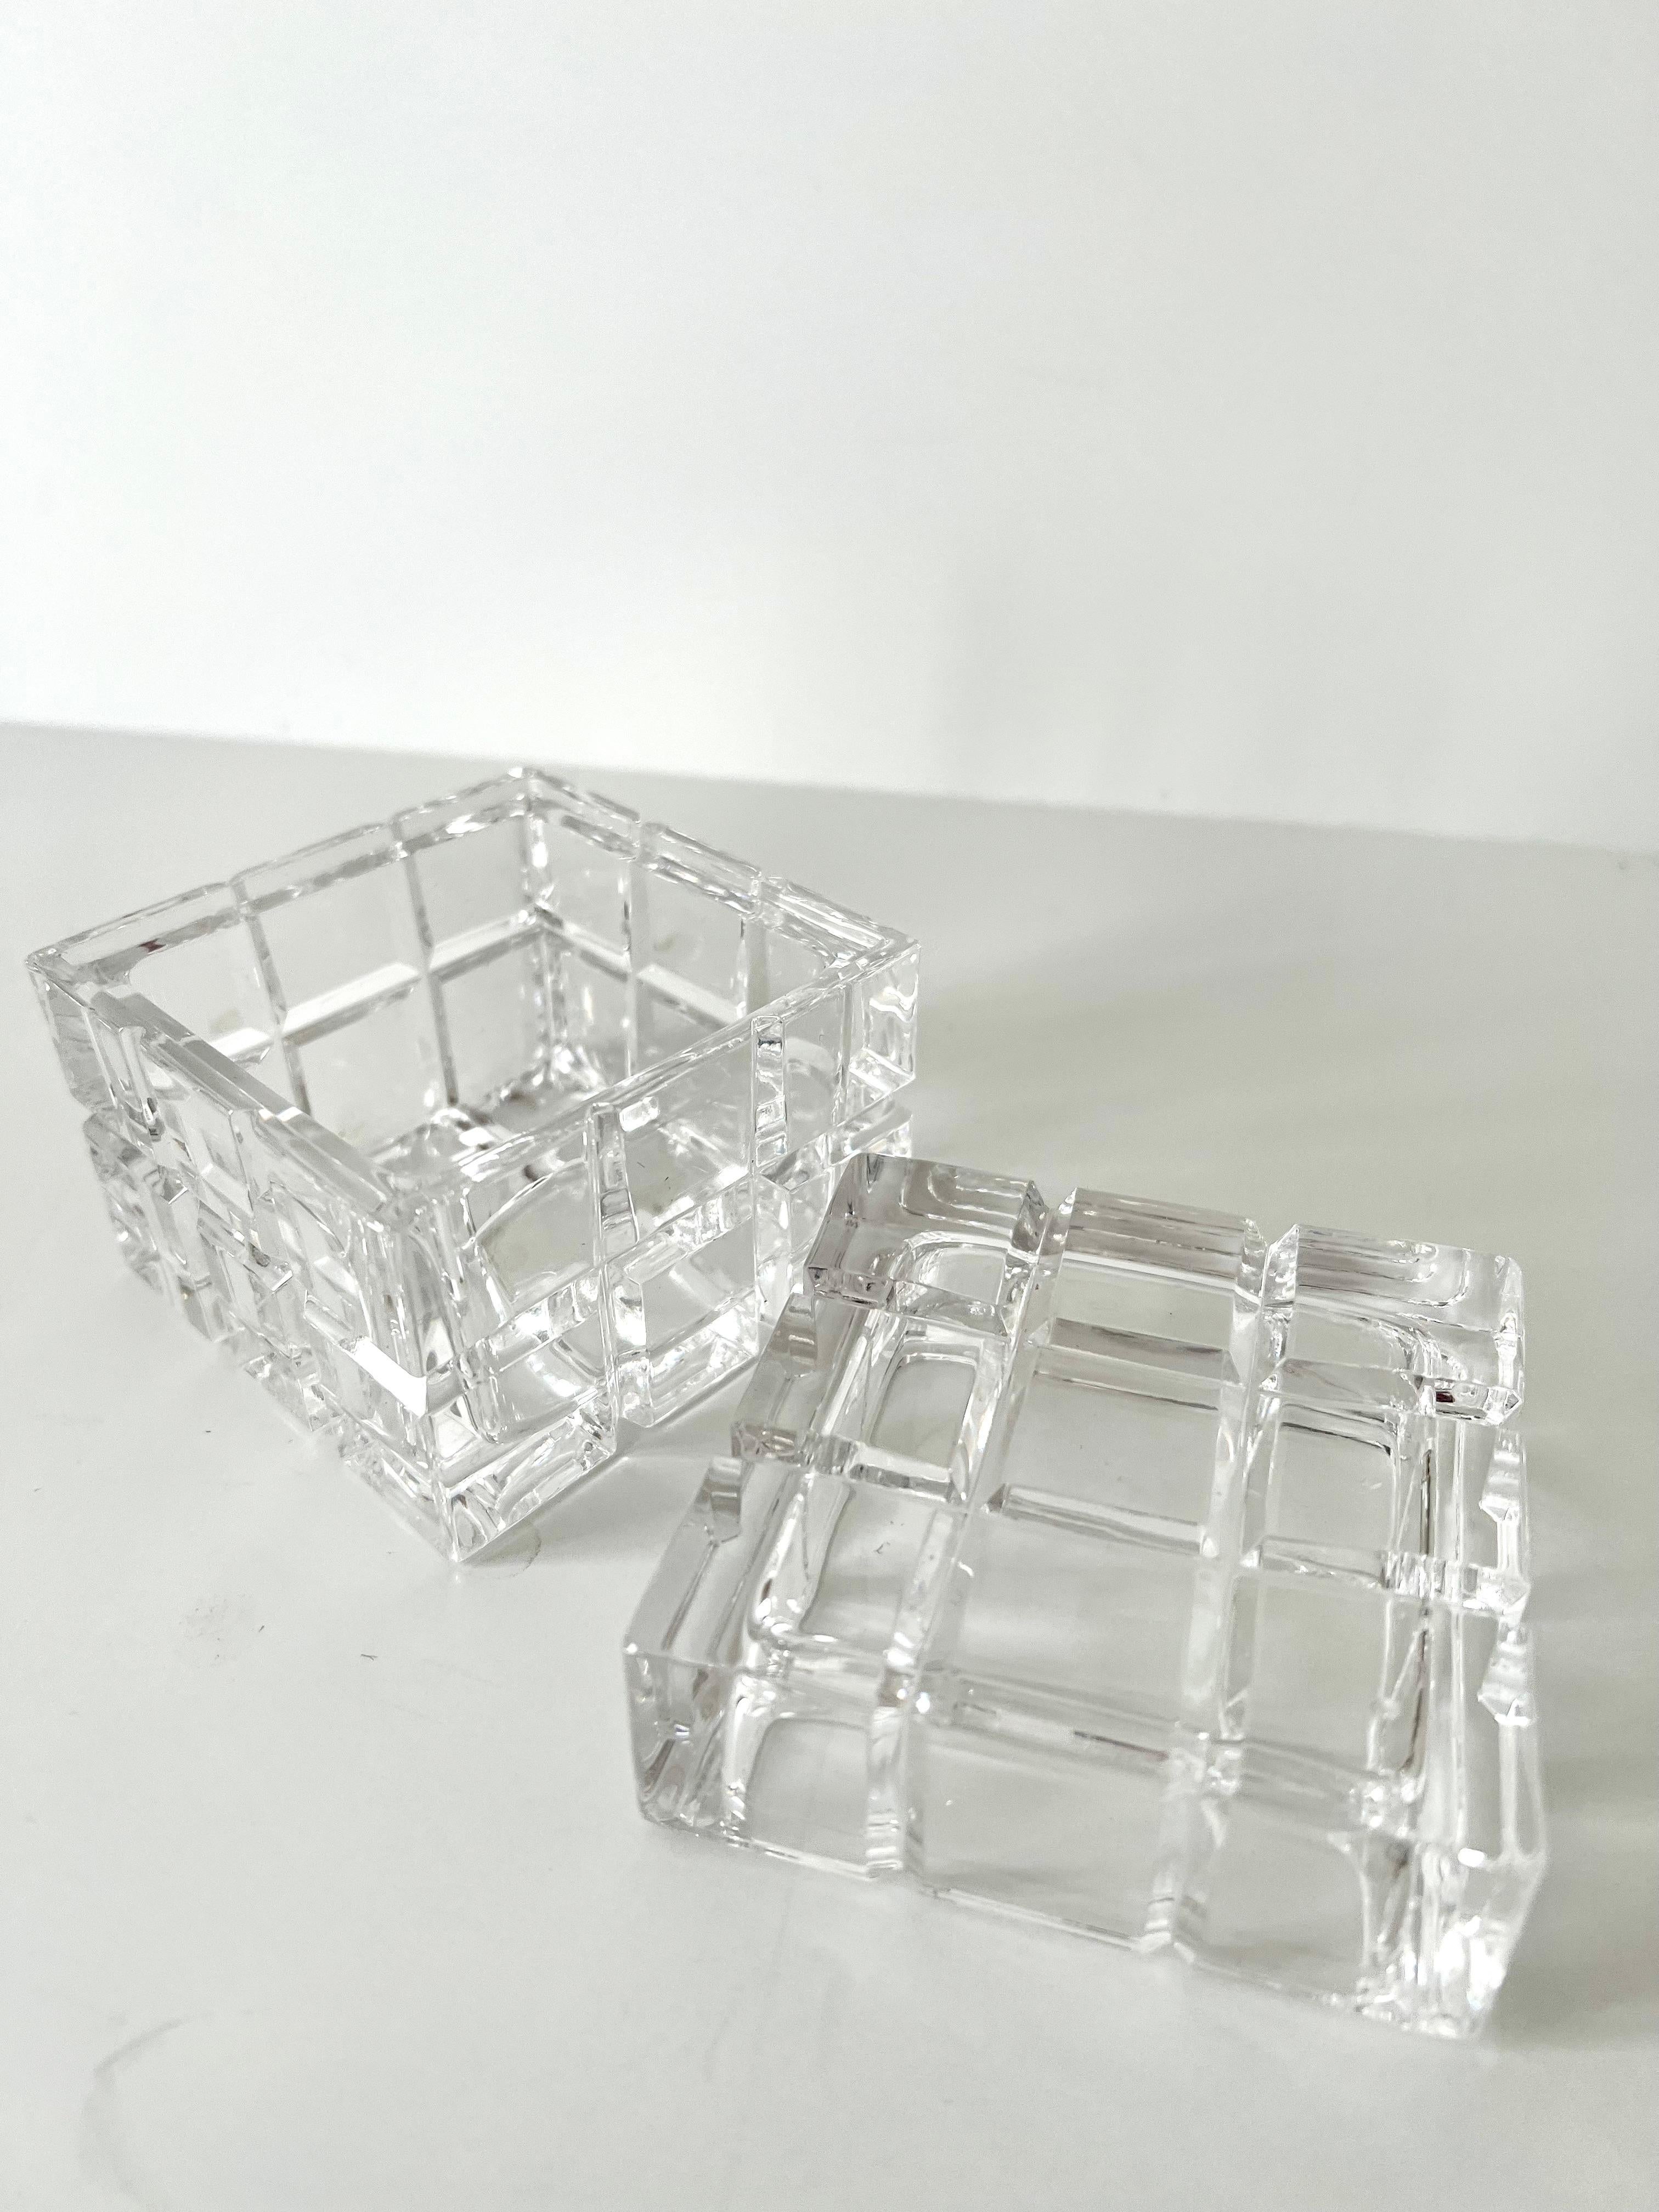 Cut Crystal Lidded Box in the Style of Tiffany and Company 1